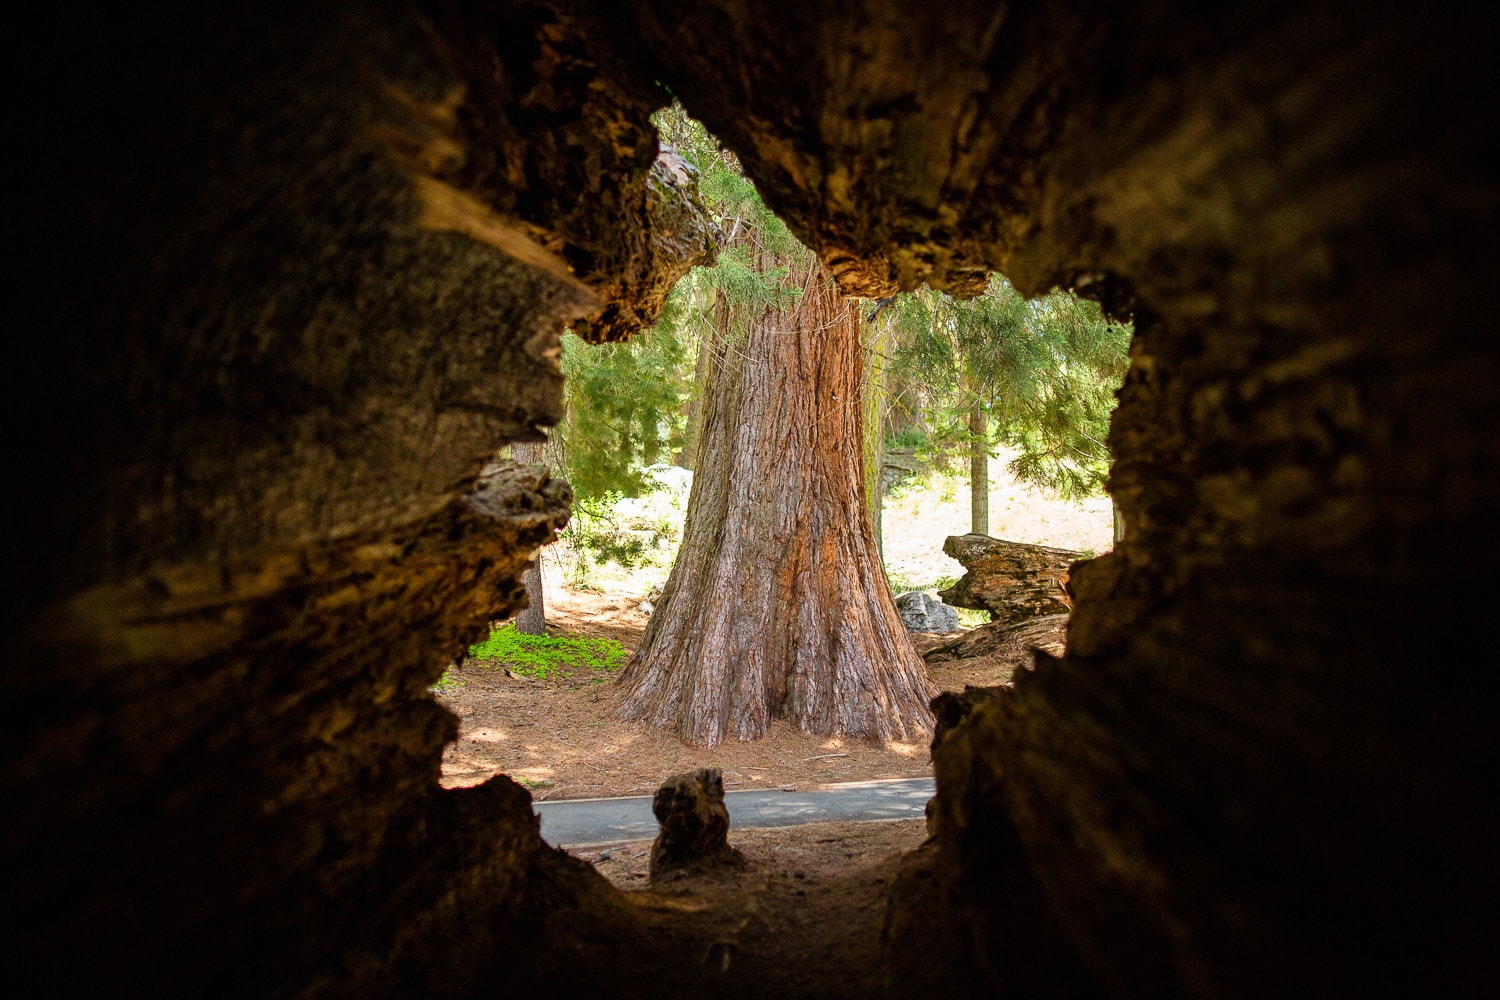 A view inside a sequoia tree looking at another tree.